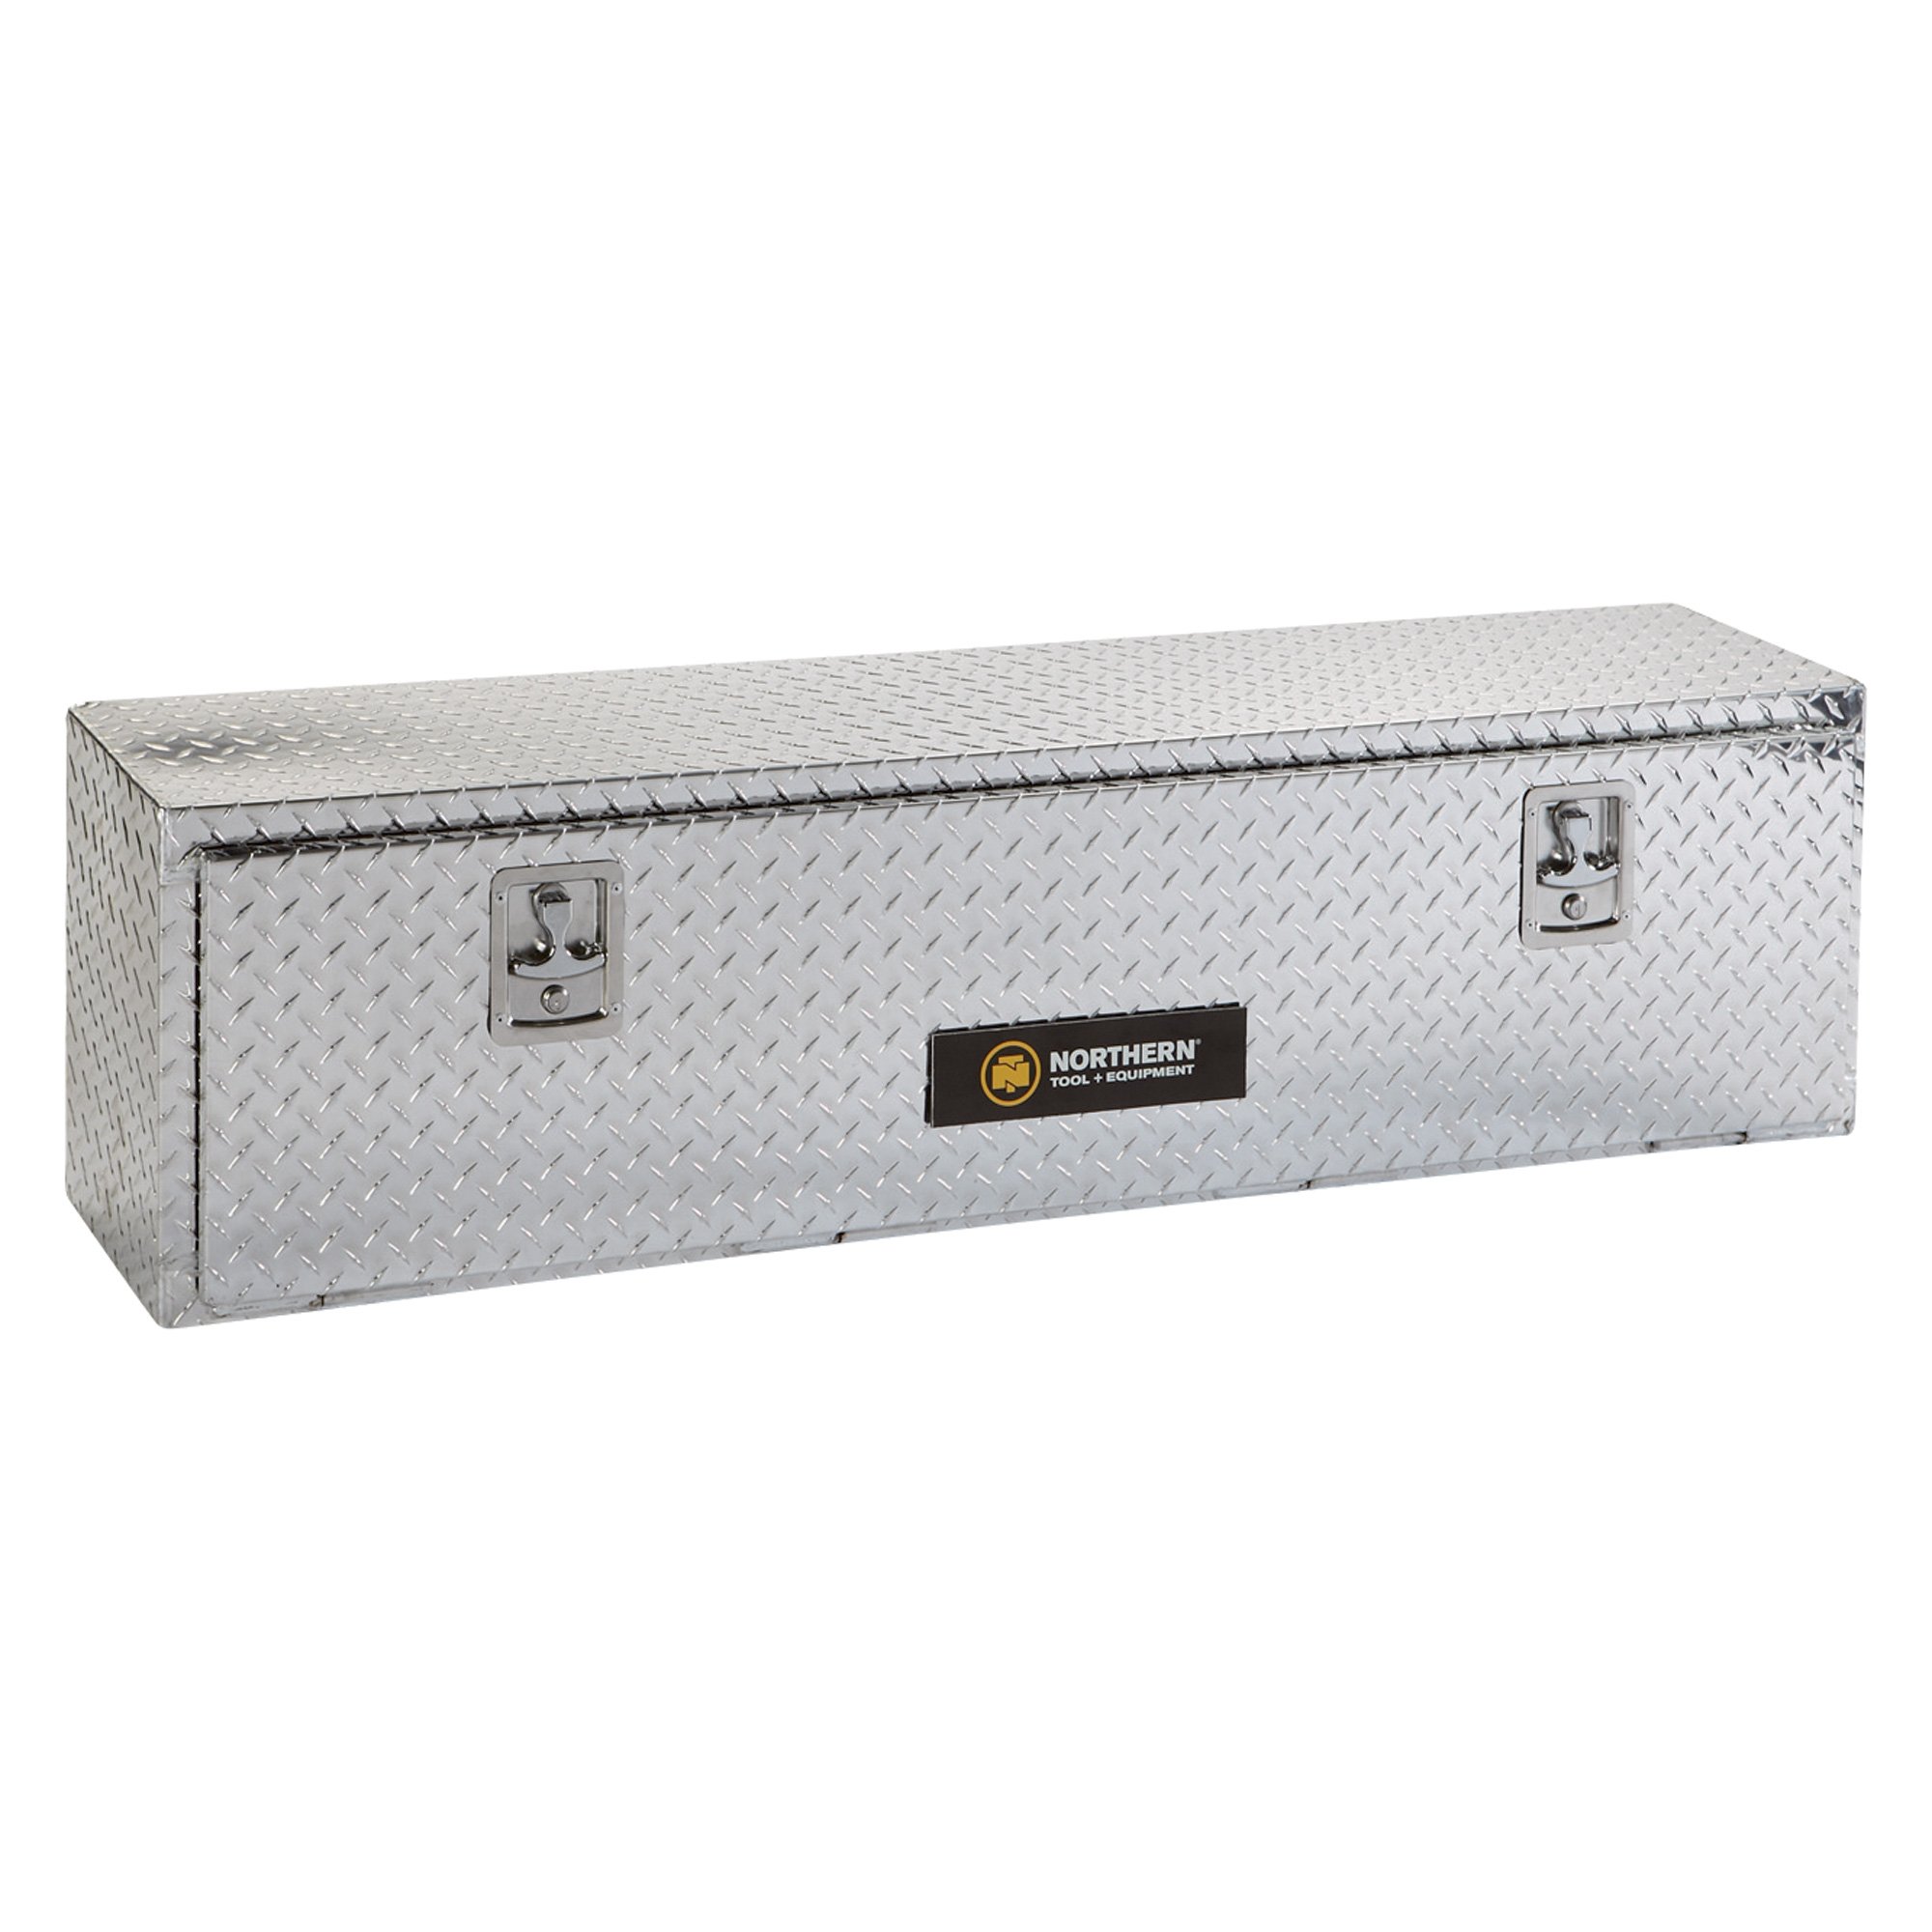 Northern Tool Tote Tool Box with Handle, Aluminum, Diamond Plate, Hasp  Latch, 30in. x 12in. x 12in., Model# 36012774